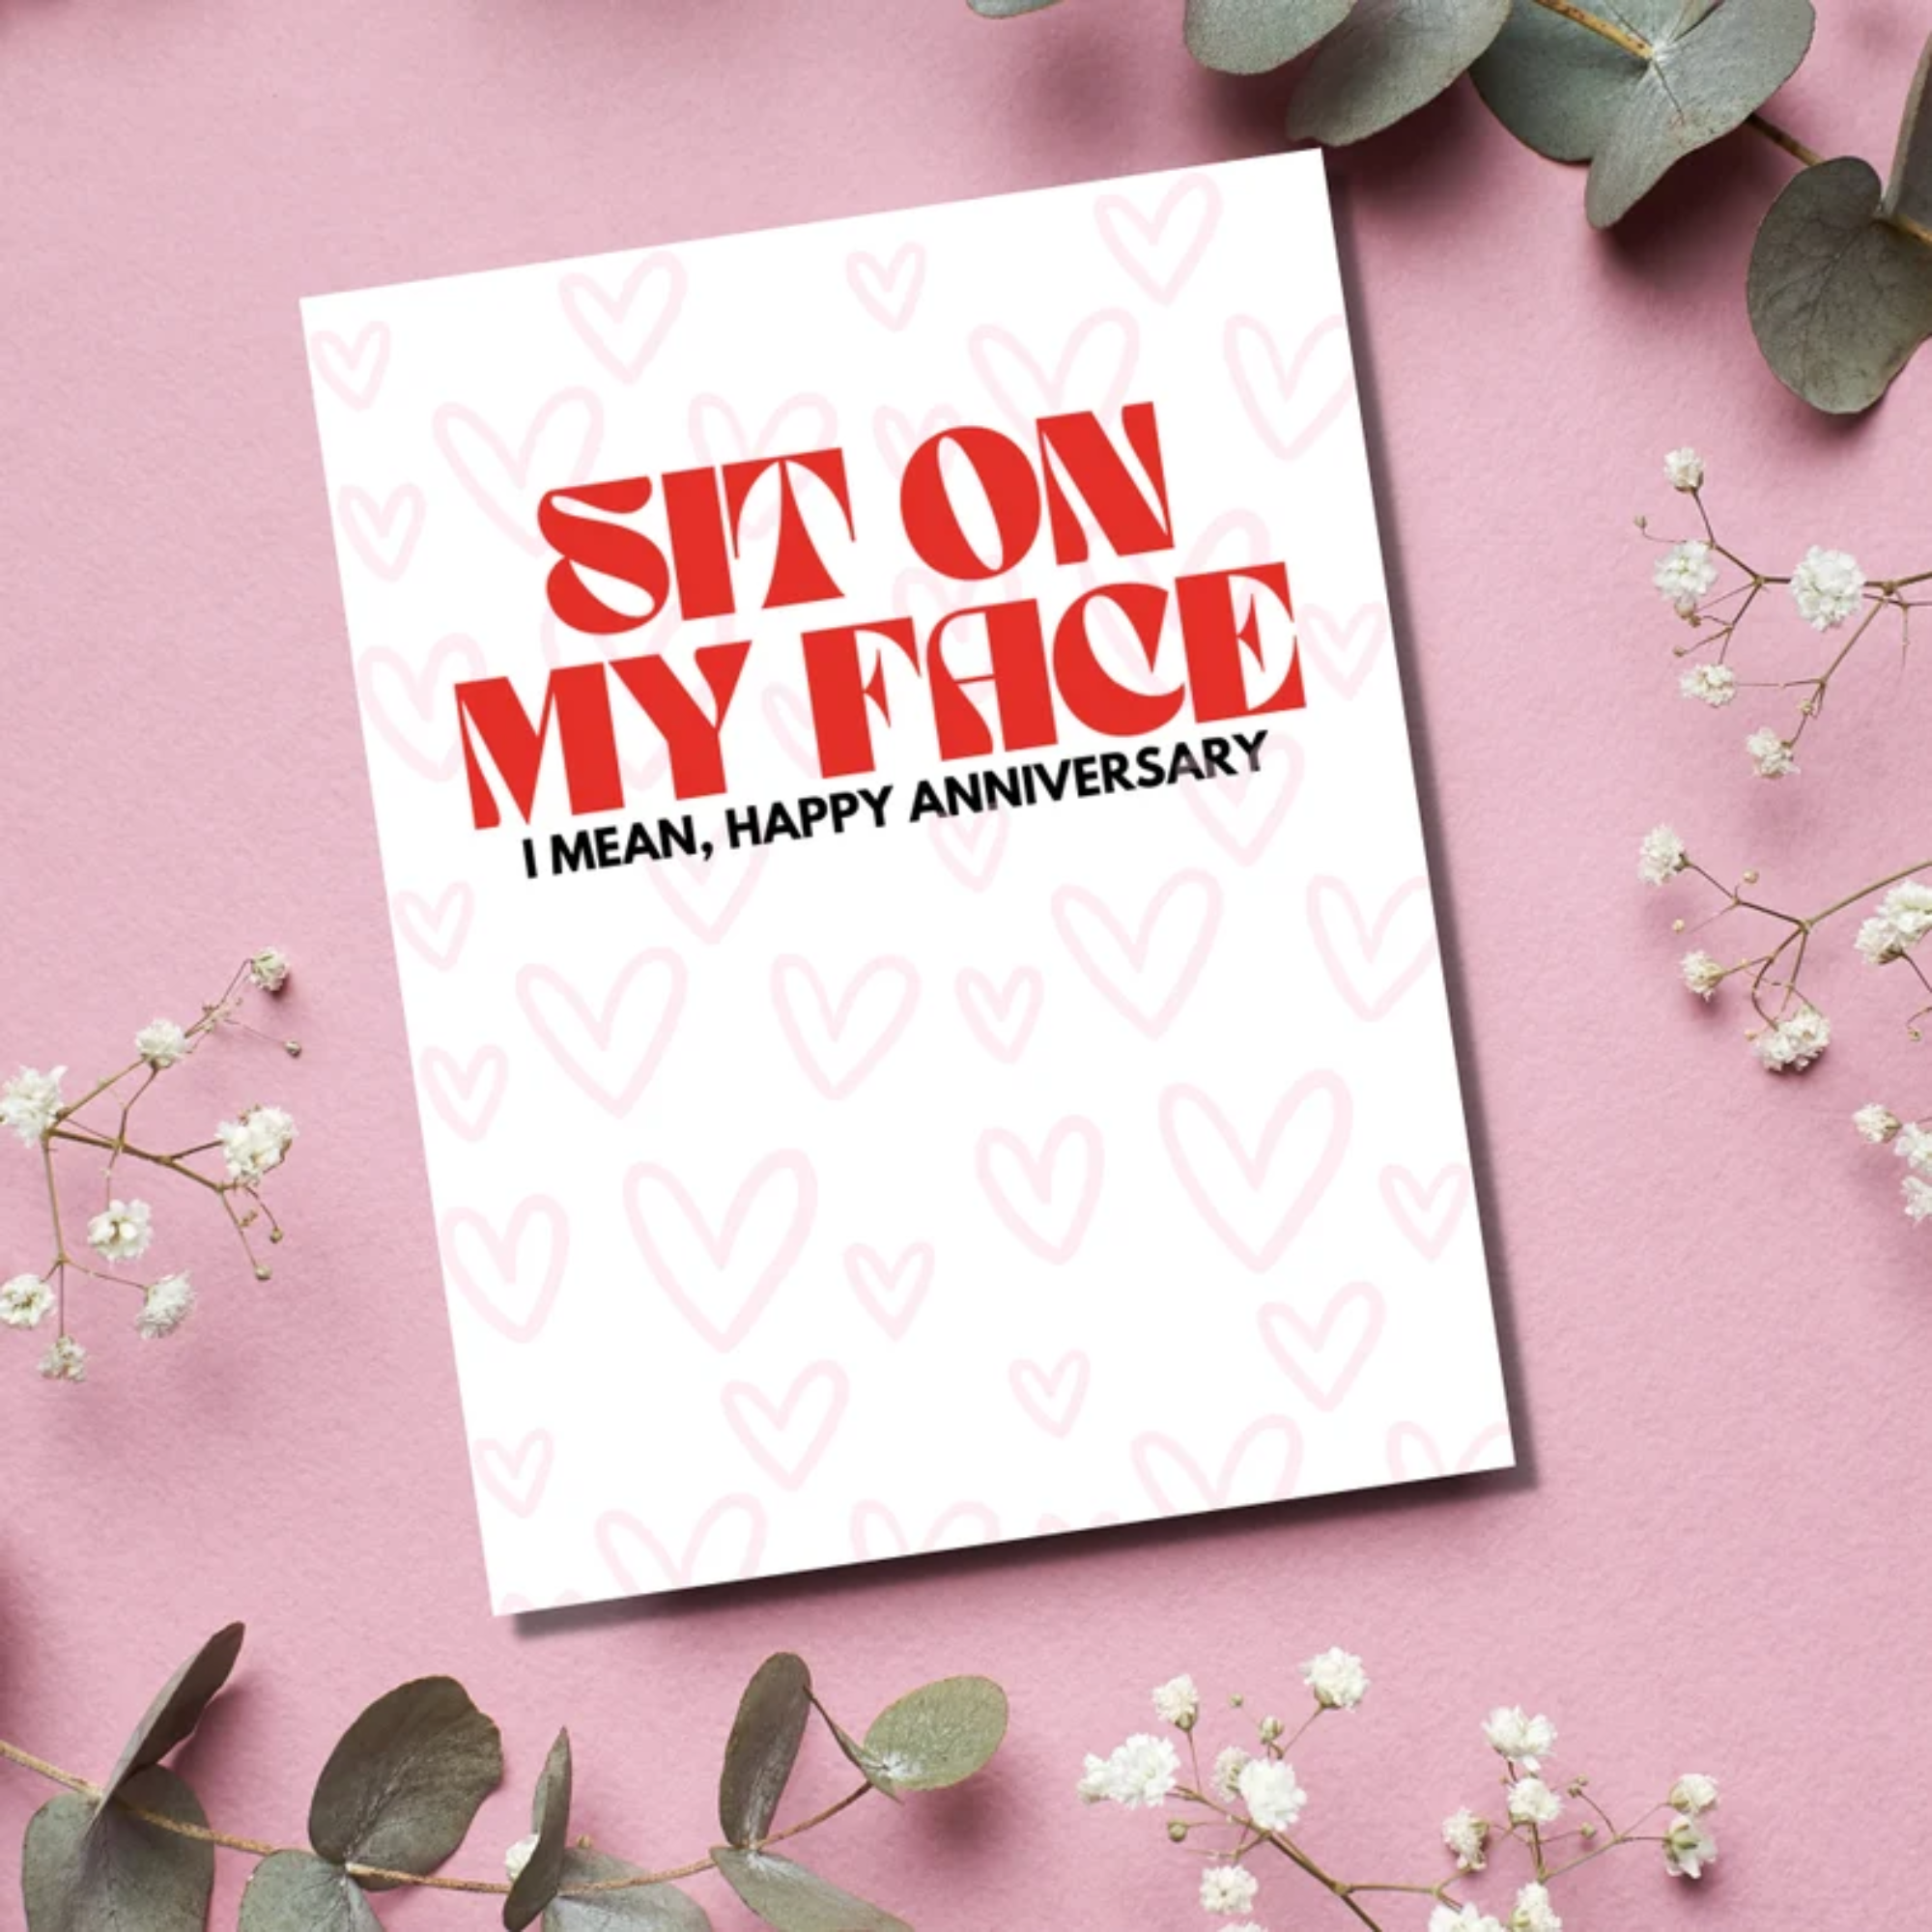 Sit on My Face Anniversary Card